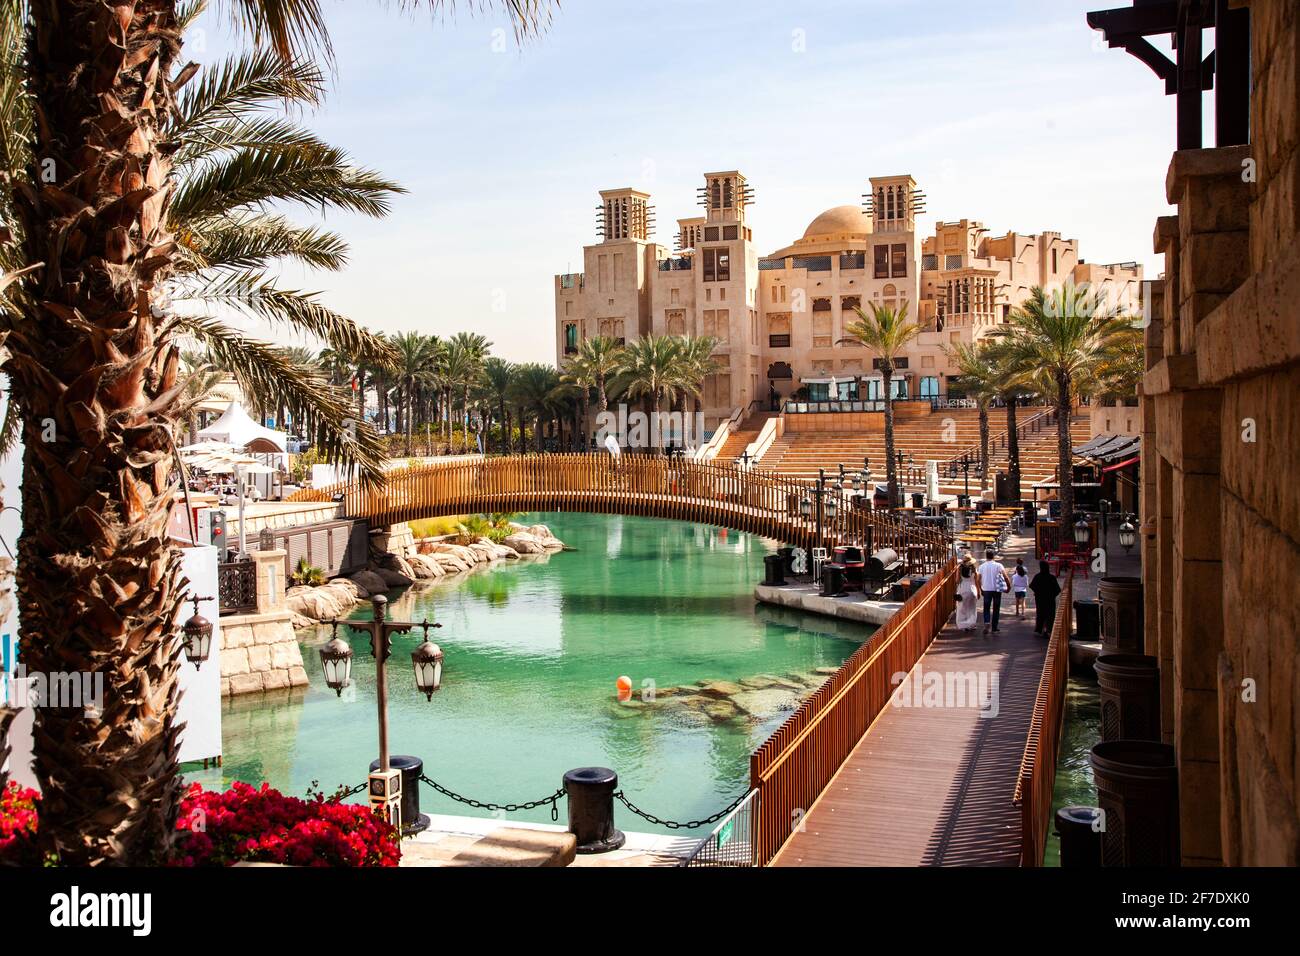 DUBAI, UAE - FEBRUARY, 2018: Madinat Jumeirah, a luxury resort which include hotels and souk spreding across over 40 hectars Stock Photo